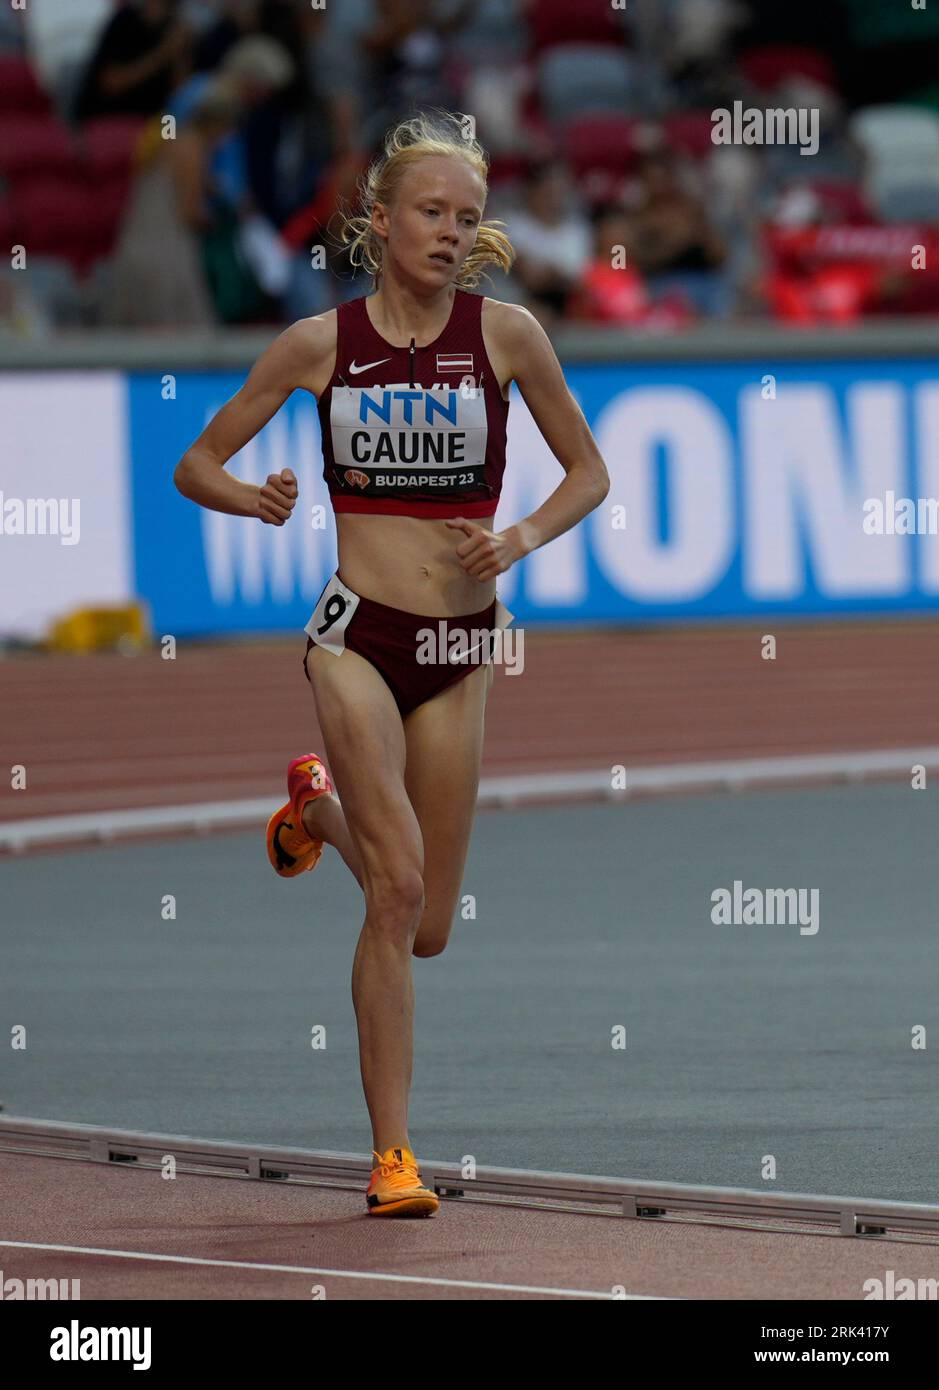 Budapest,HUN,  23 Aug 2023 Agate Caune (LAT) in action during the World Athletics Championships 2023 National Athletics Centre Budapest at National Athletics Centre Budapest Hungary on August 23 2023 Alamy Live News Stock Photo